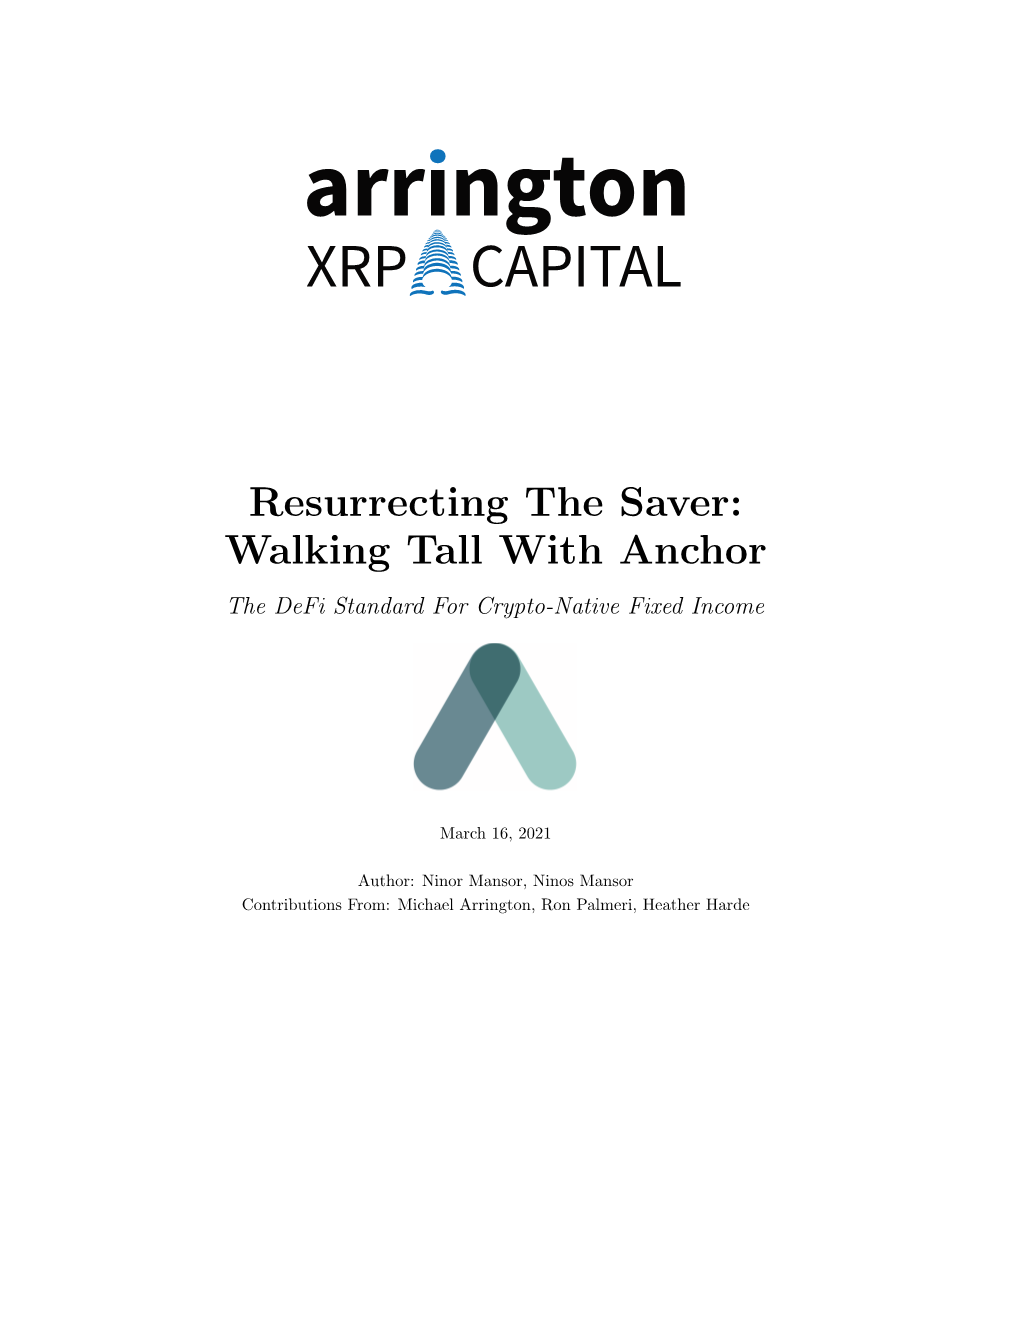 Resurrecting the Saver: Walking Tall with Anchor the Defi Standard for Crypto-Native Fixed Income